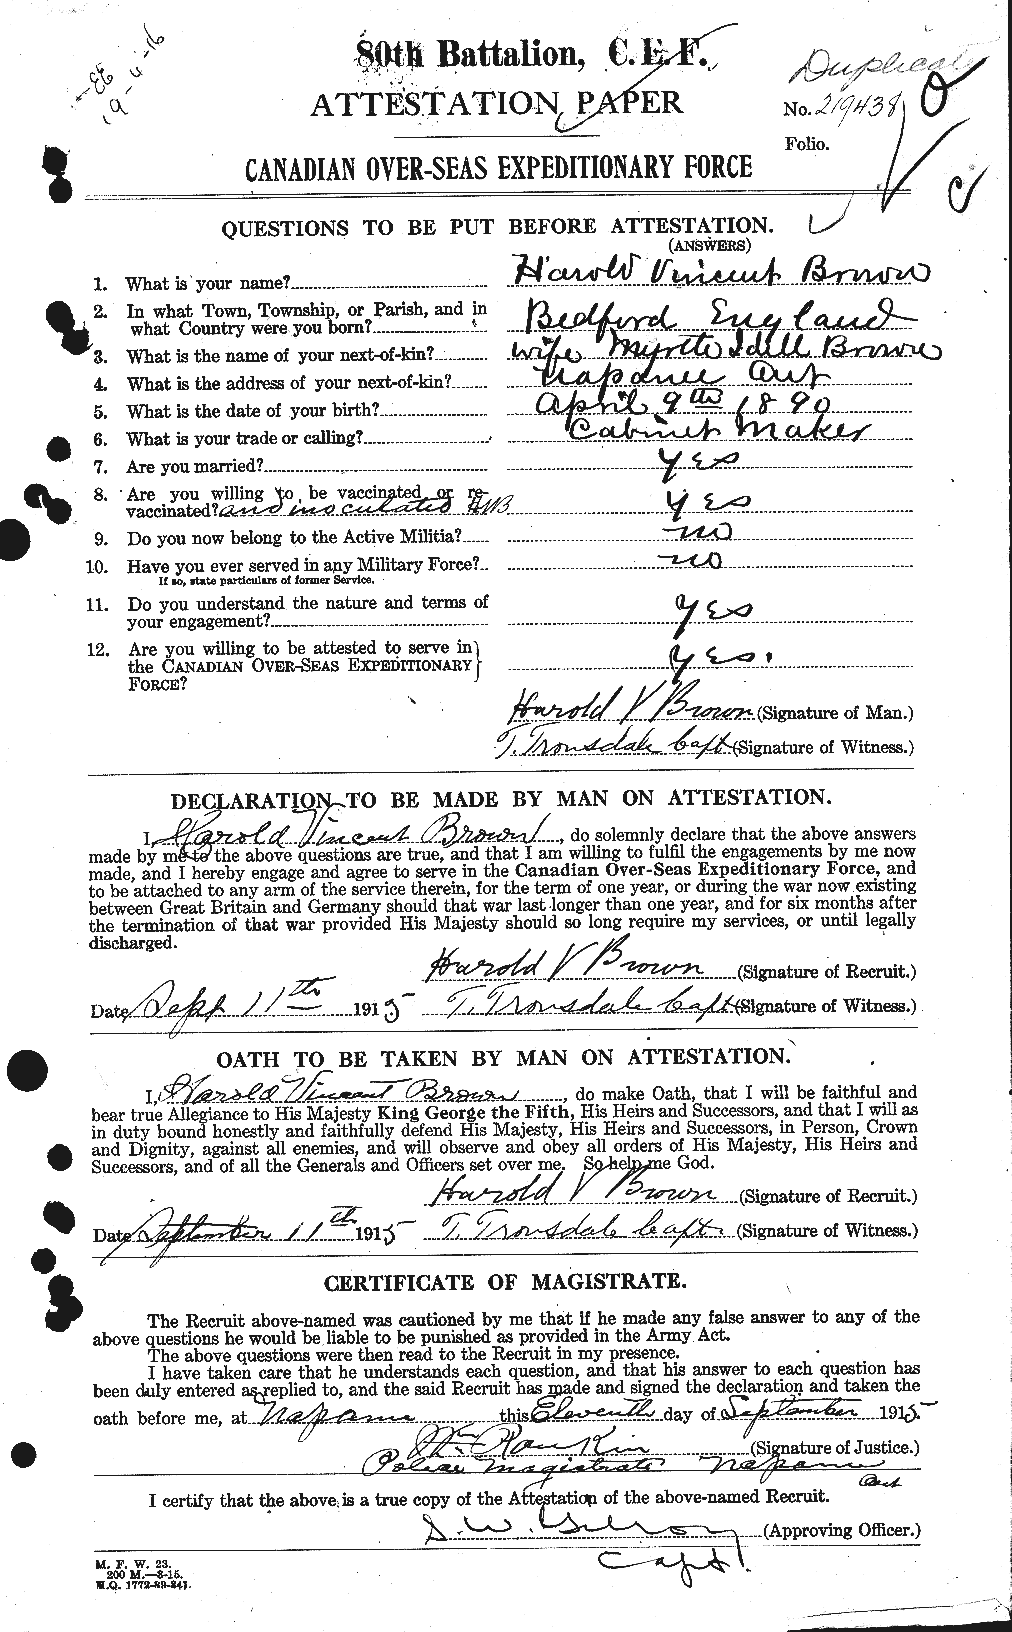 Personnel Records of the First World War - CEF 265375a